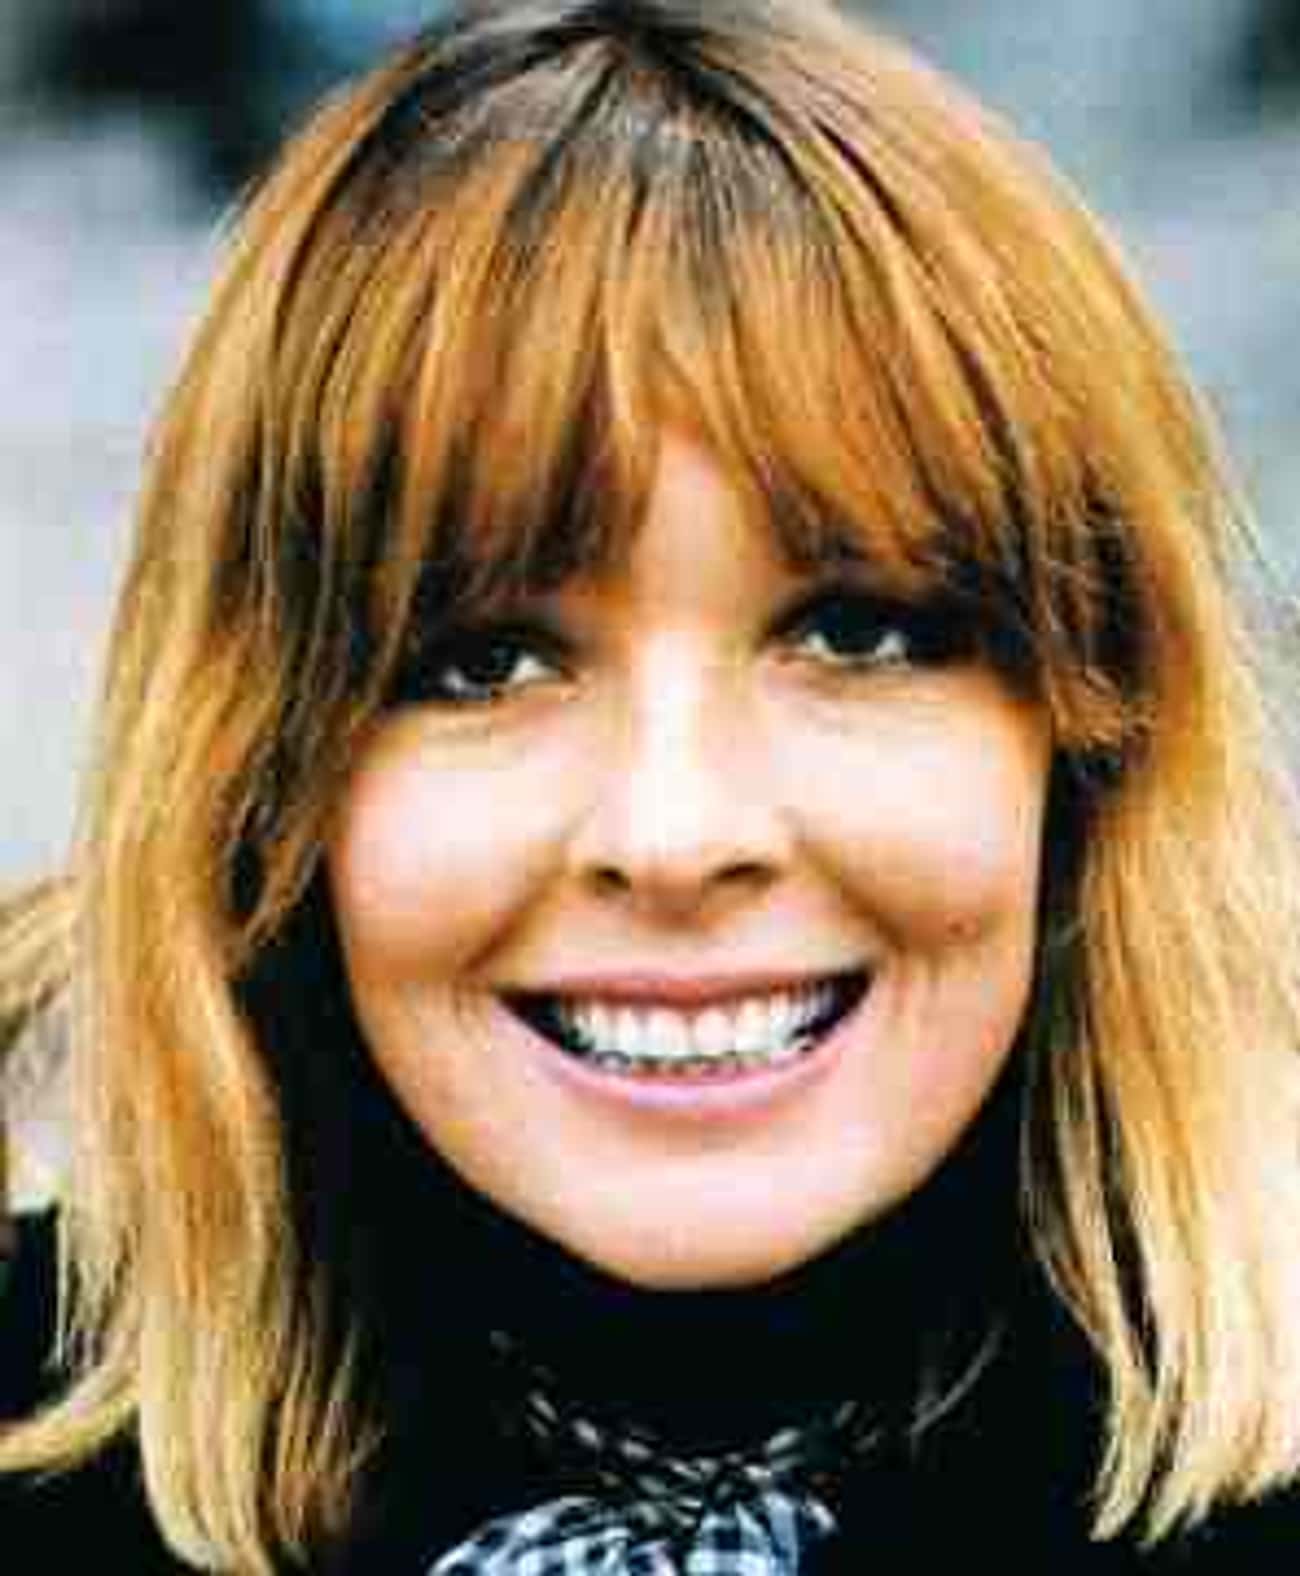 Young Diane Keaton in a Black Turtleneck